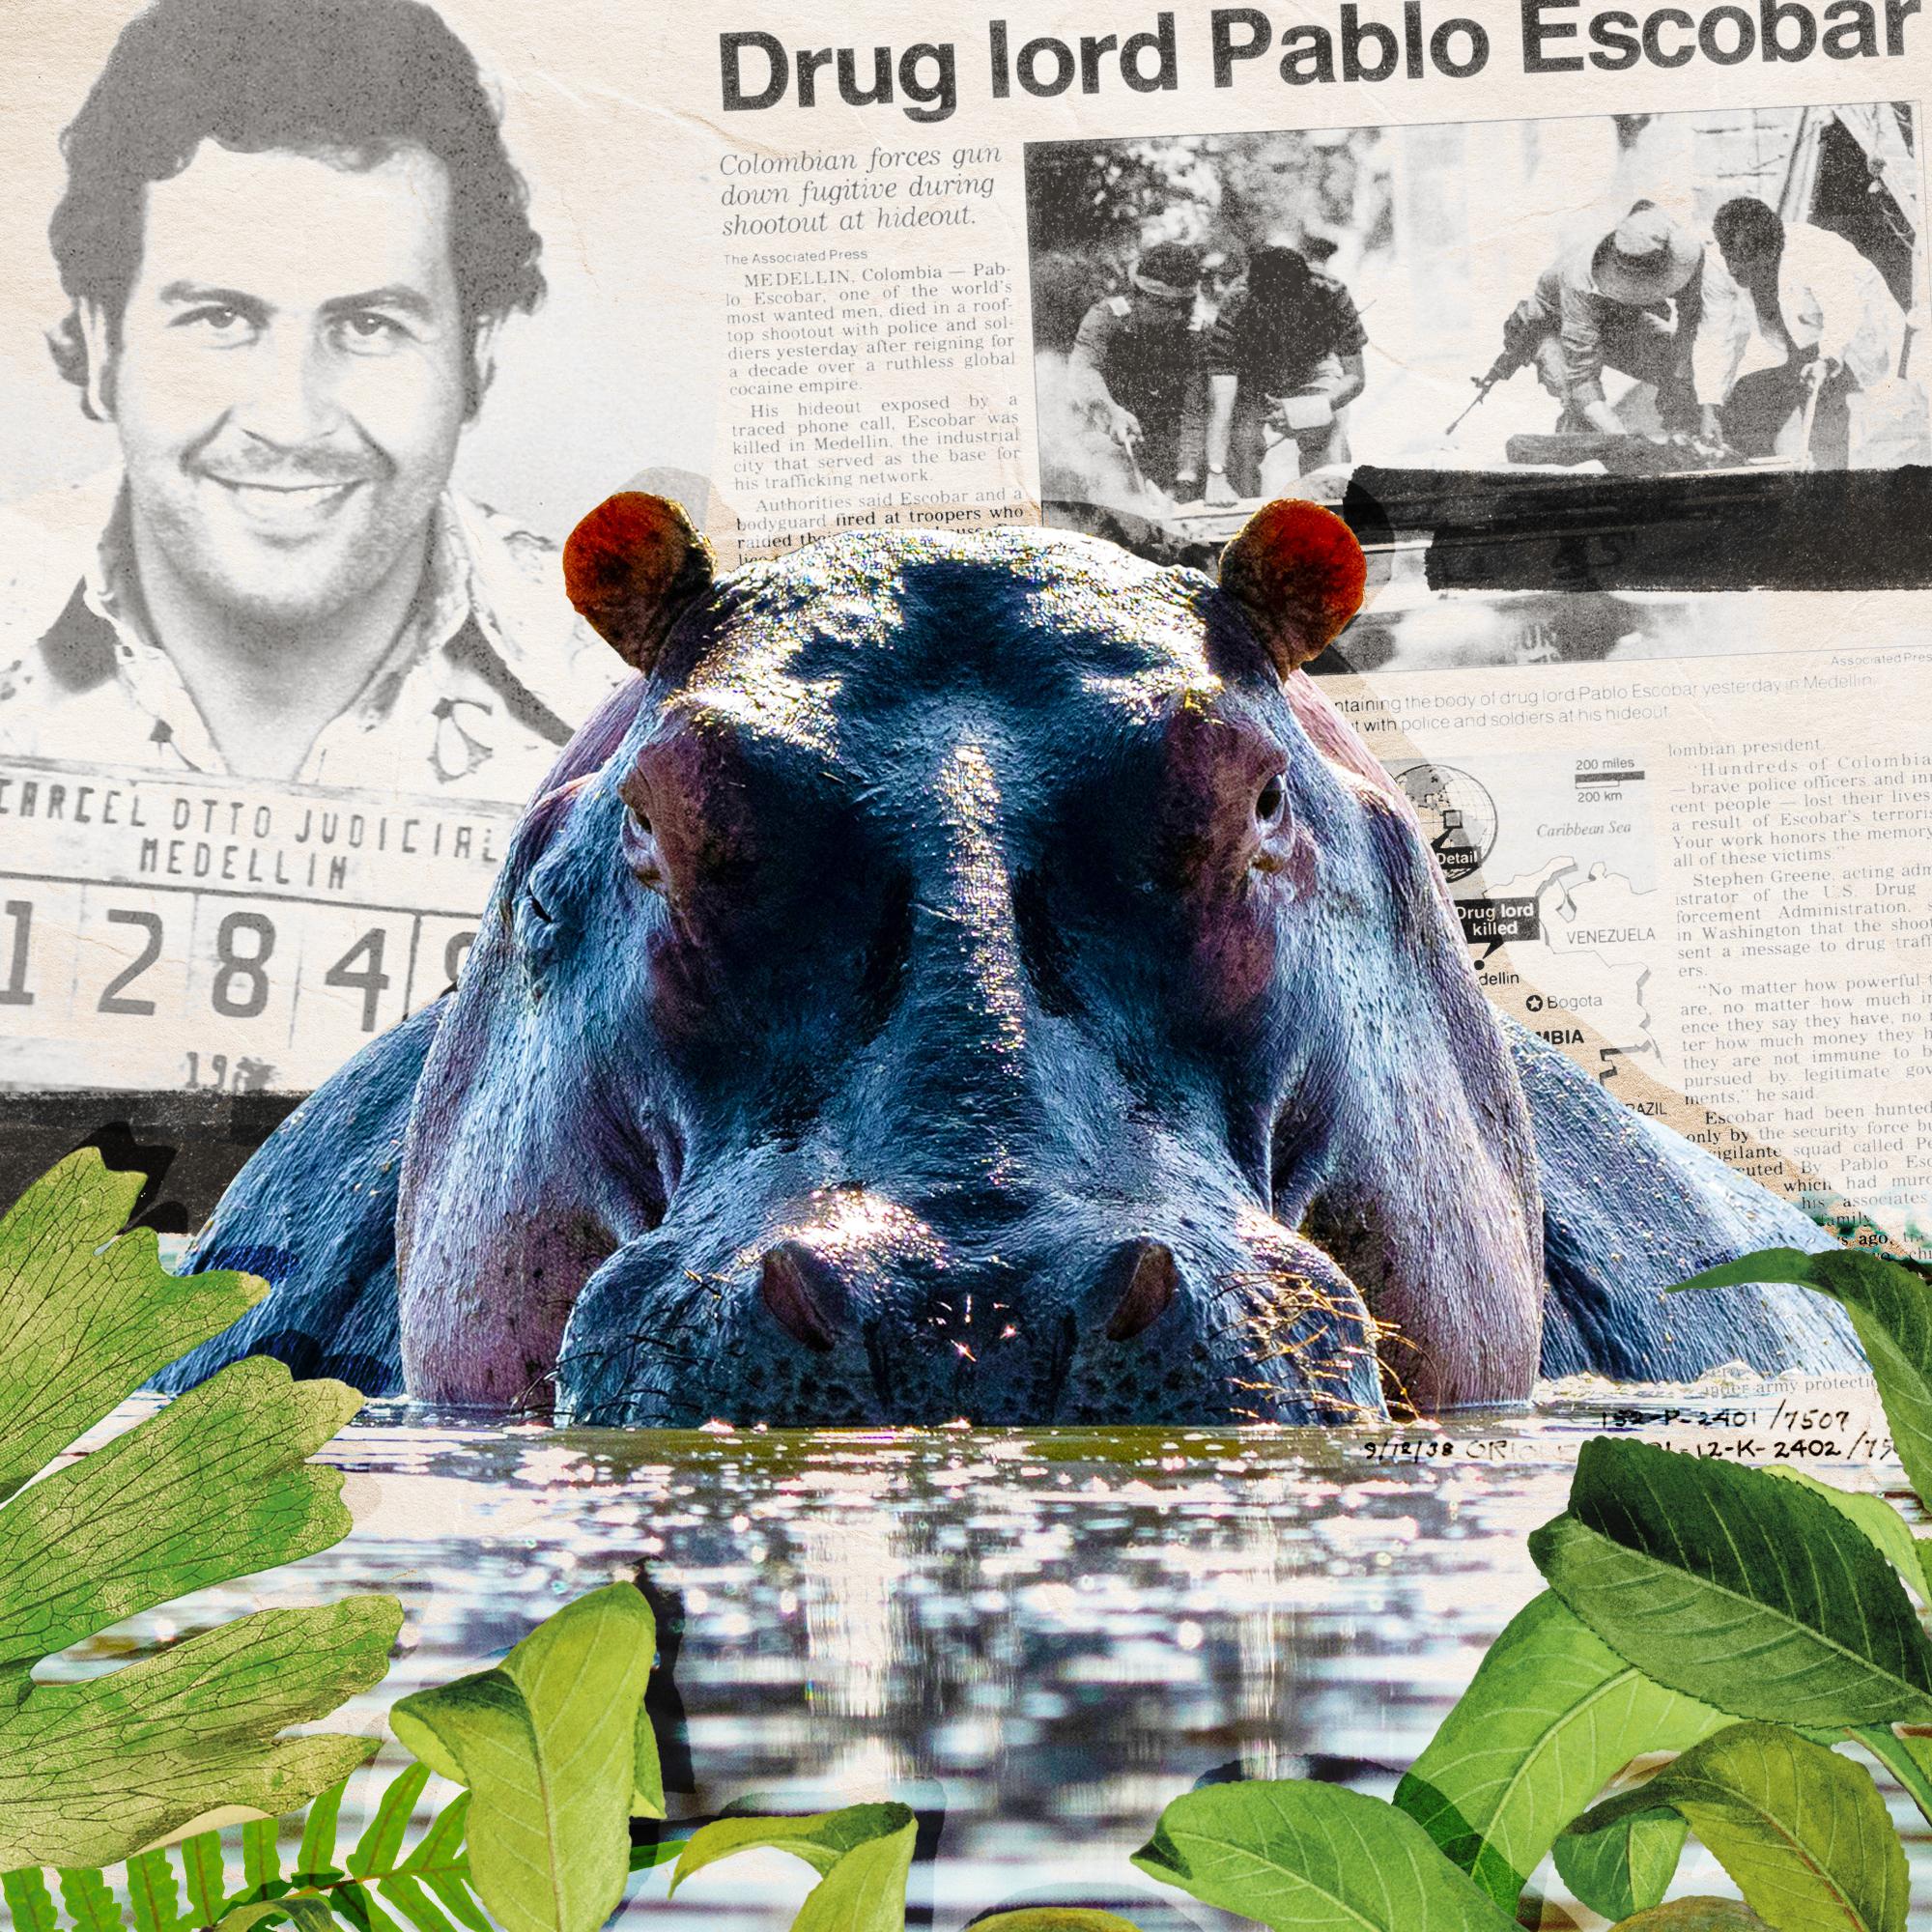 Thumbnail for "The Wild Story of What Happened to Pablo Escobar’s Hungry, Hungry Hippos".